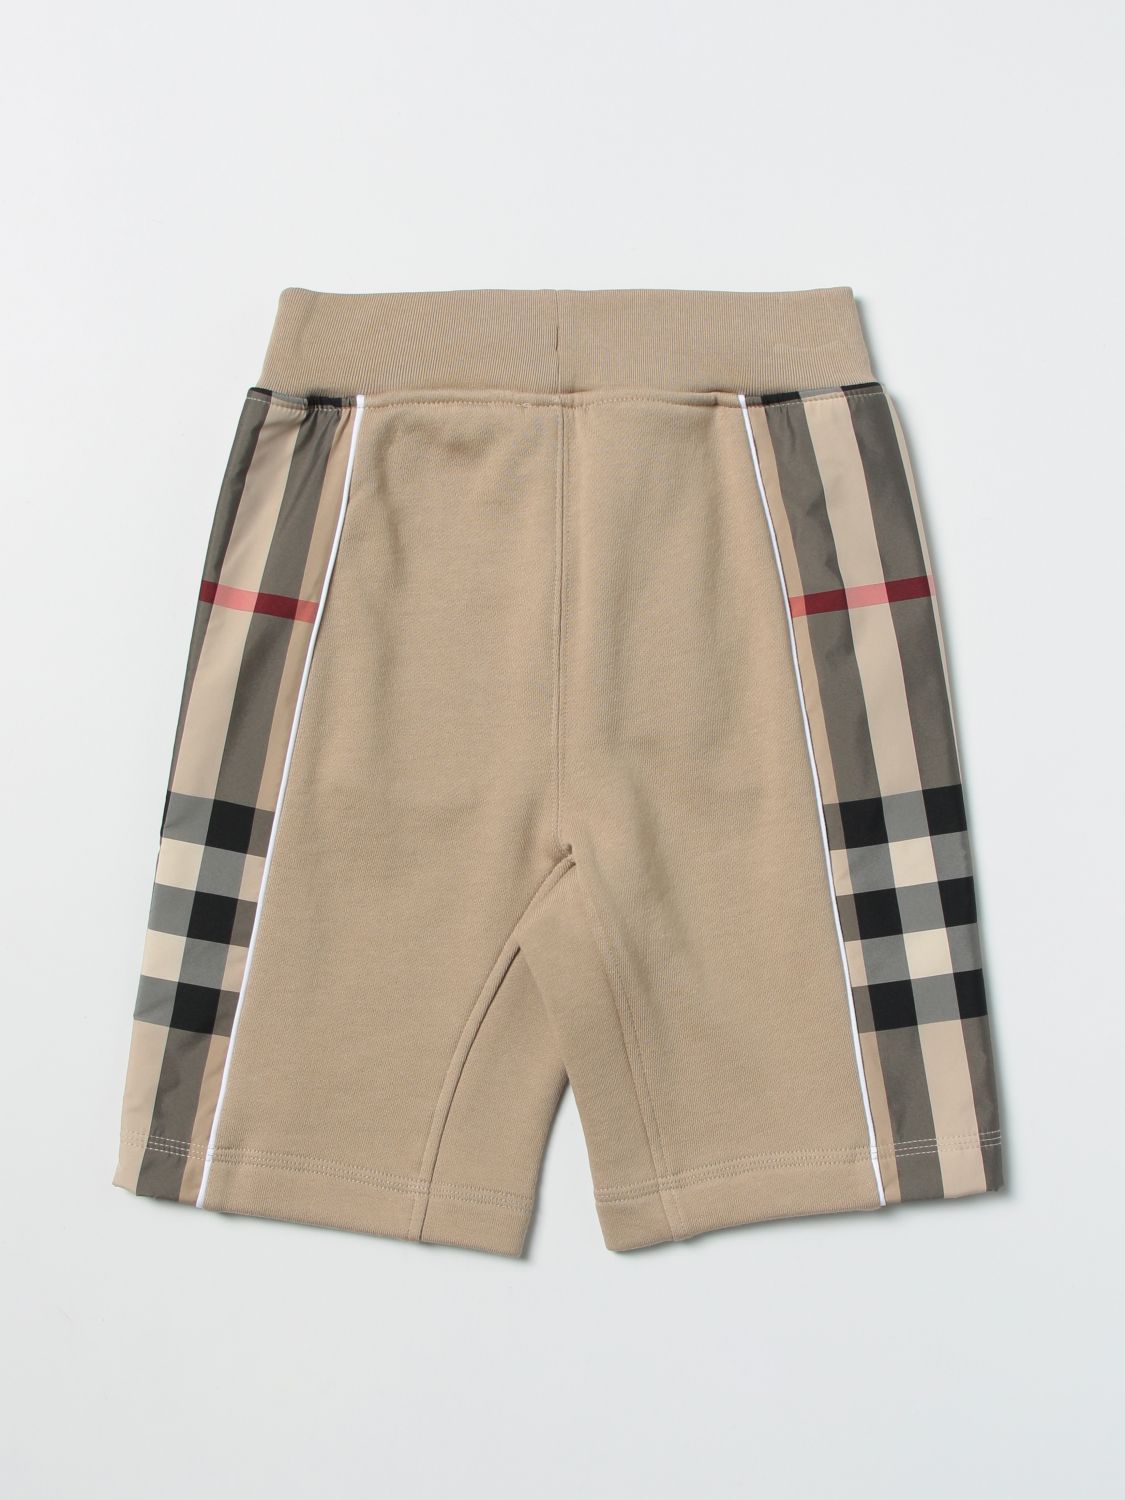 BURBERRY: cotton shorts with tartan details - Beige | Burberry shorts 8051437 online on GIGLIO.COM